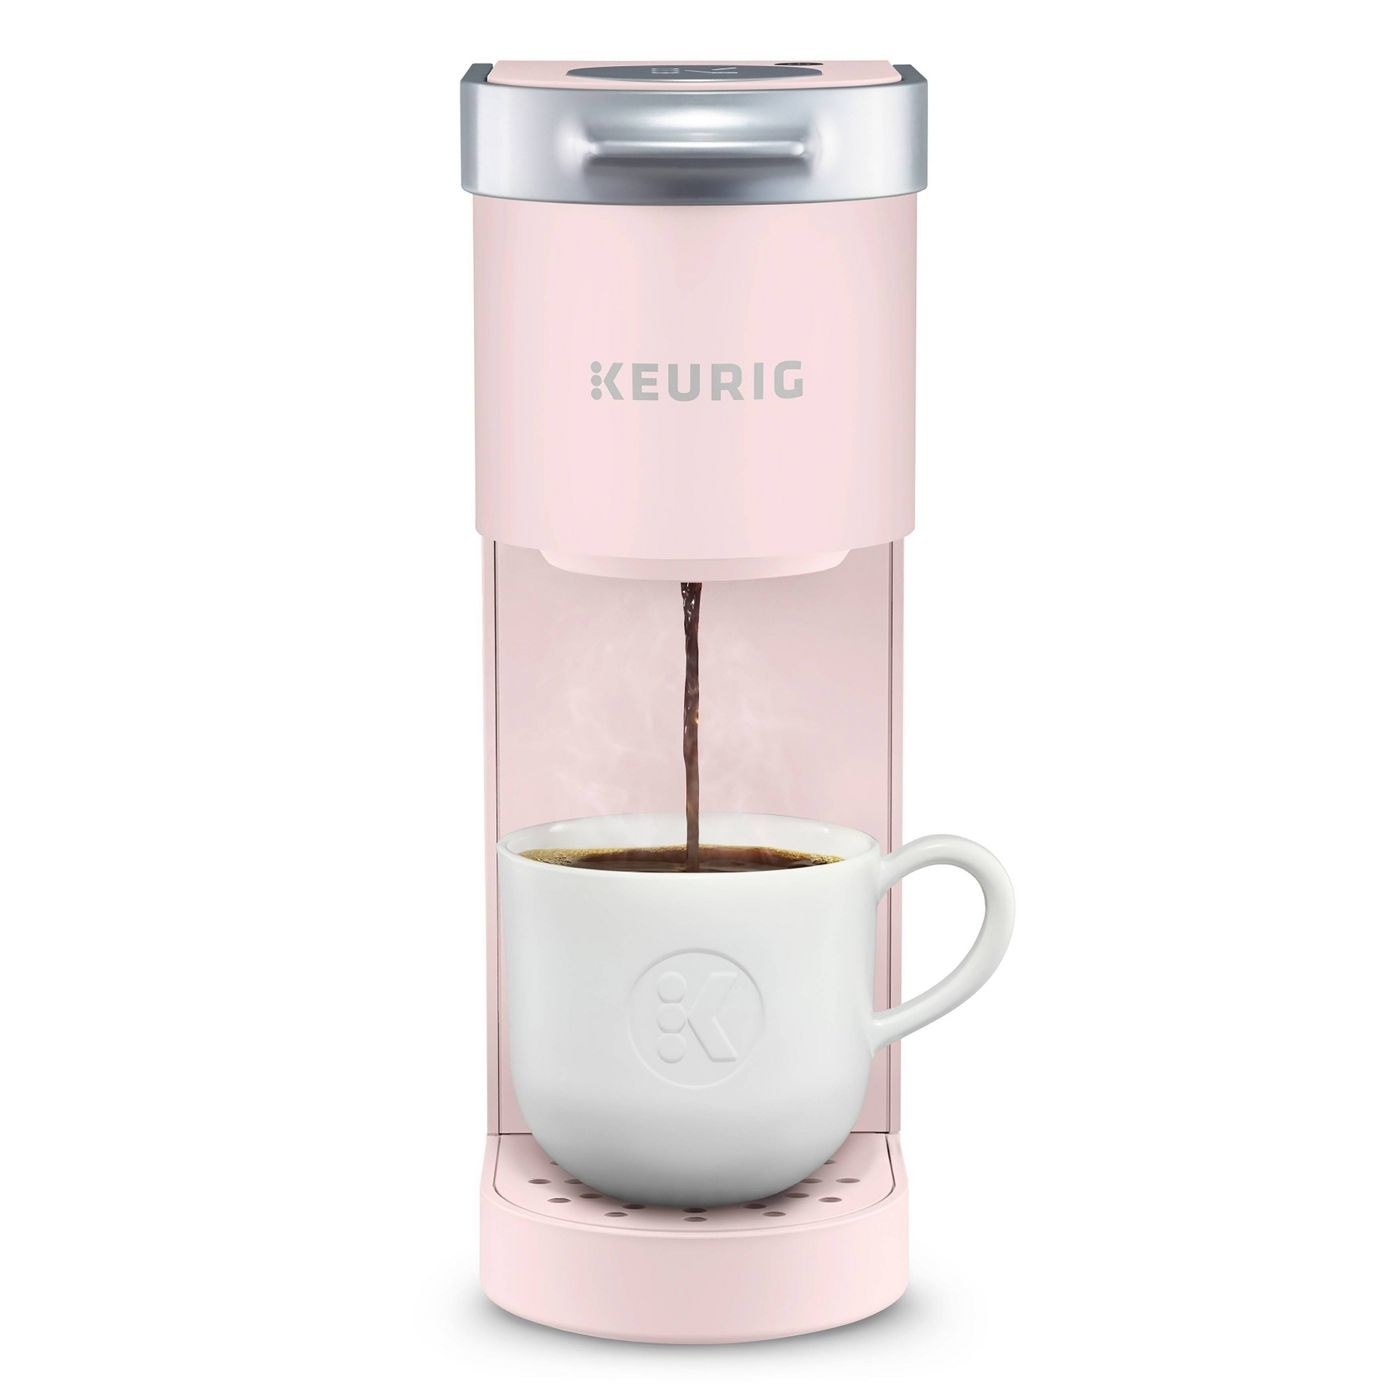 The coffee maker in light pink, which is narrow and has space for one coffee cup to be filled with coffee